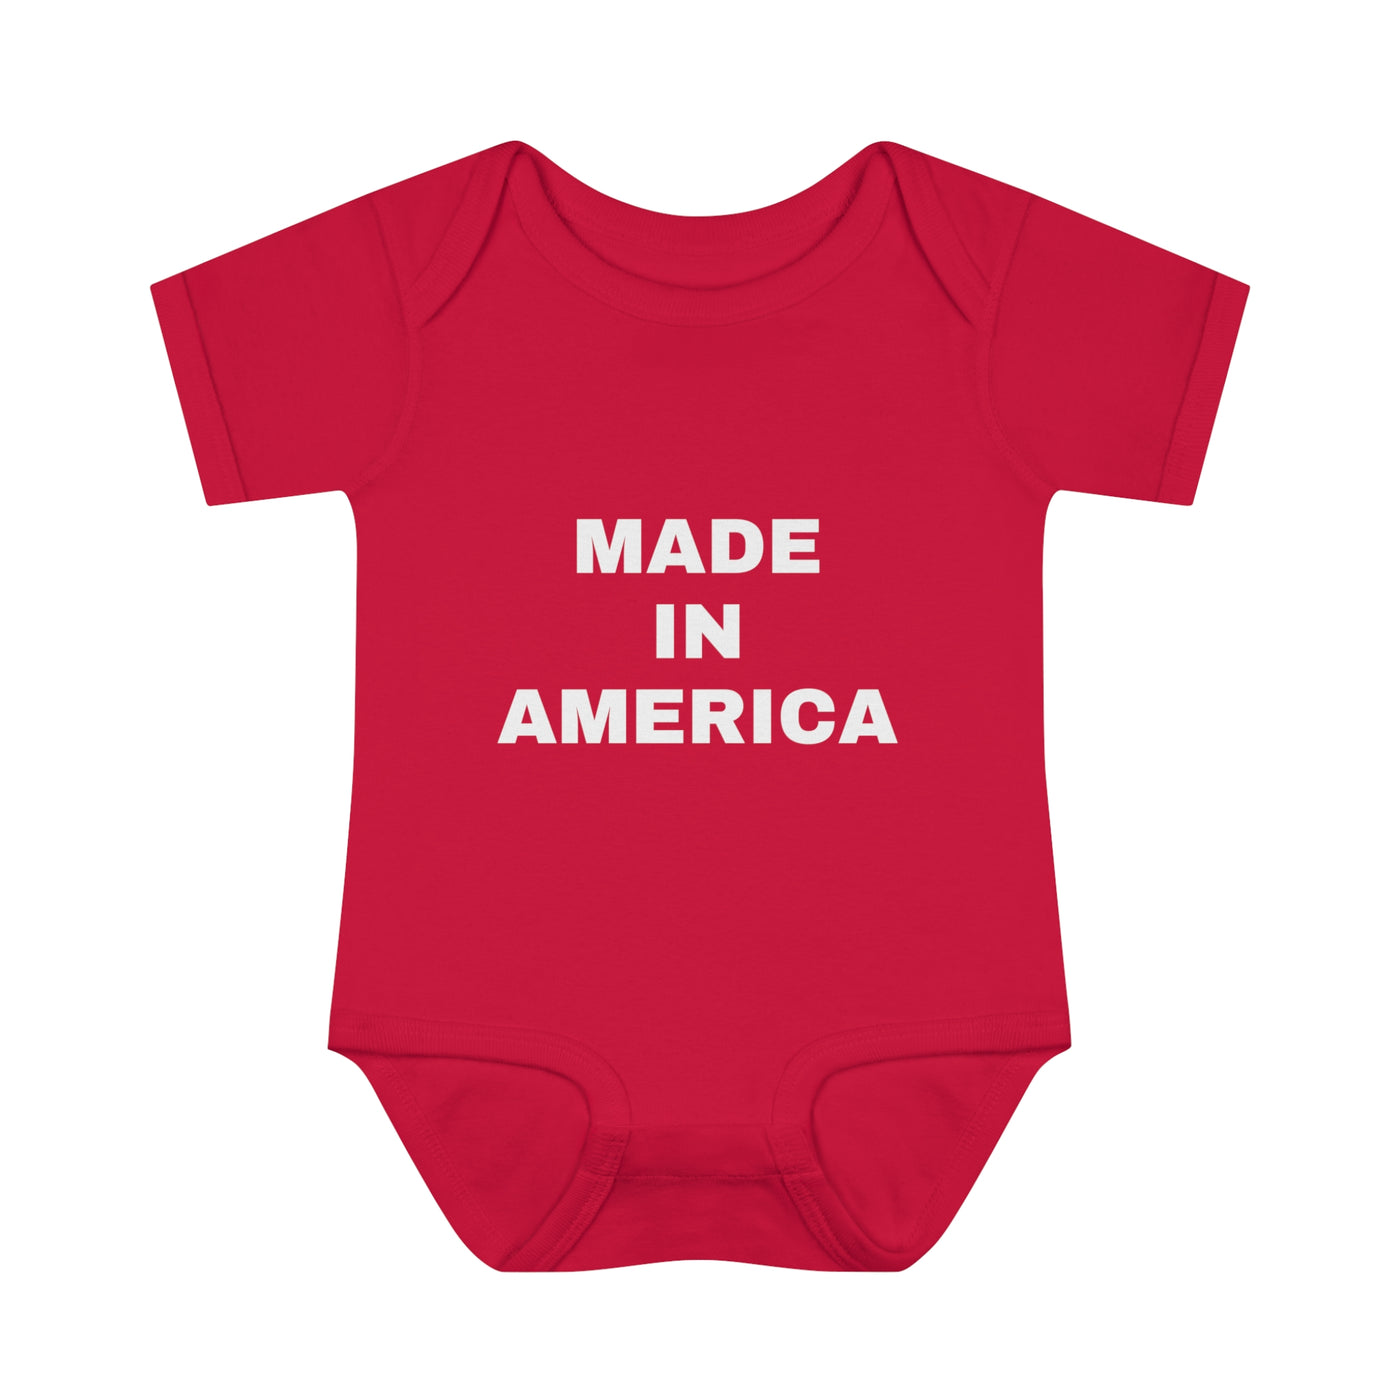 MADE IN AMERICA | BABY SHIRT - Freedom First Supply